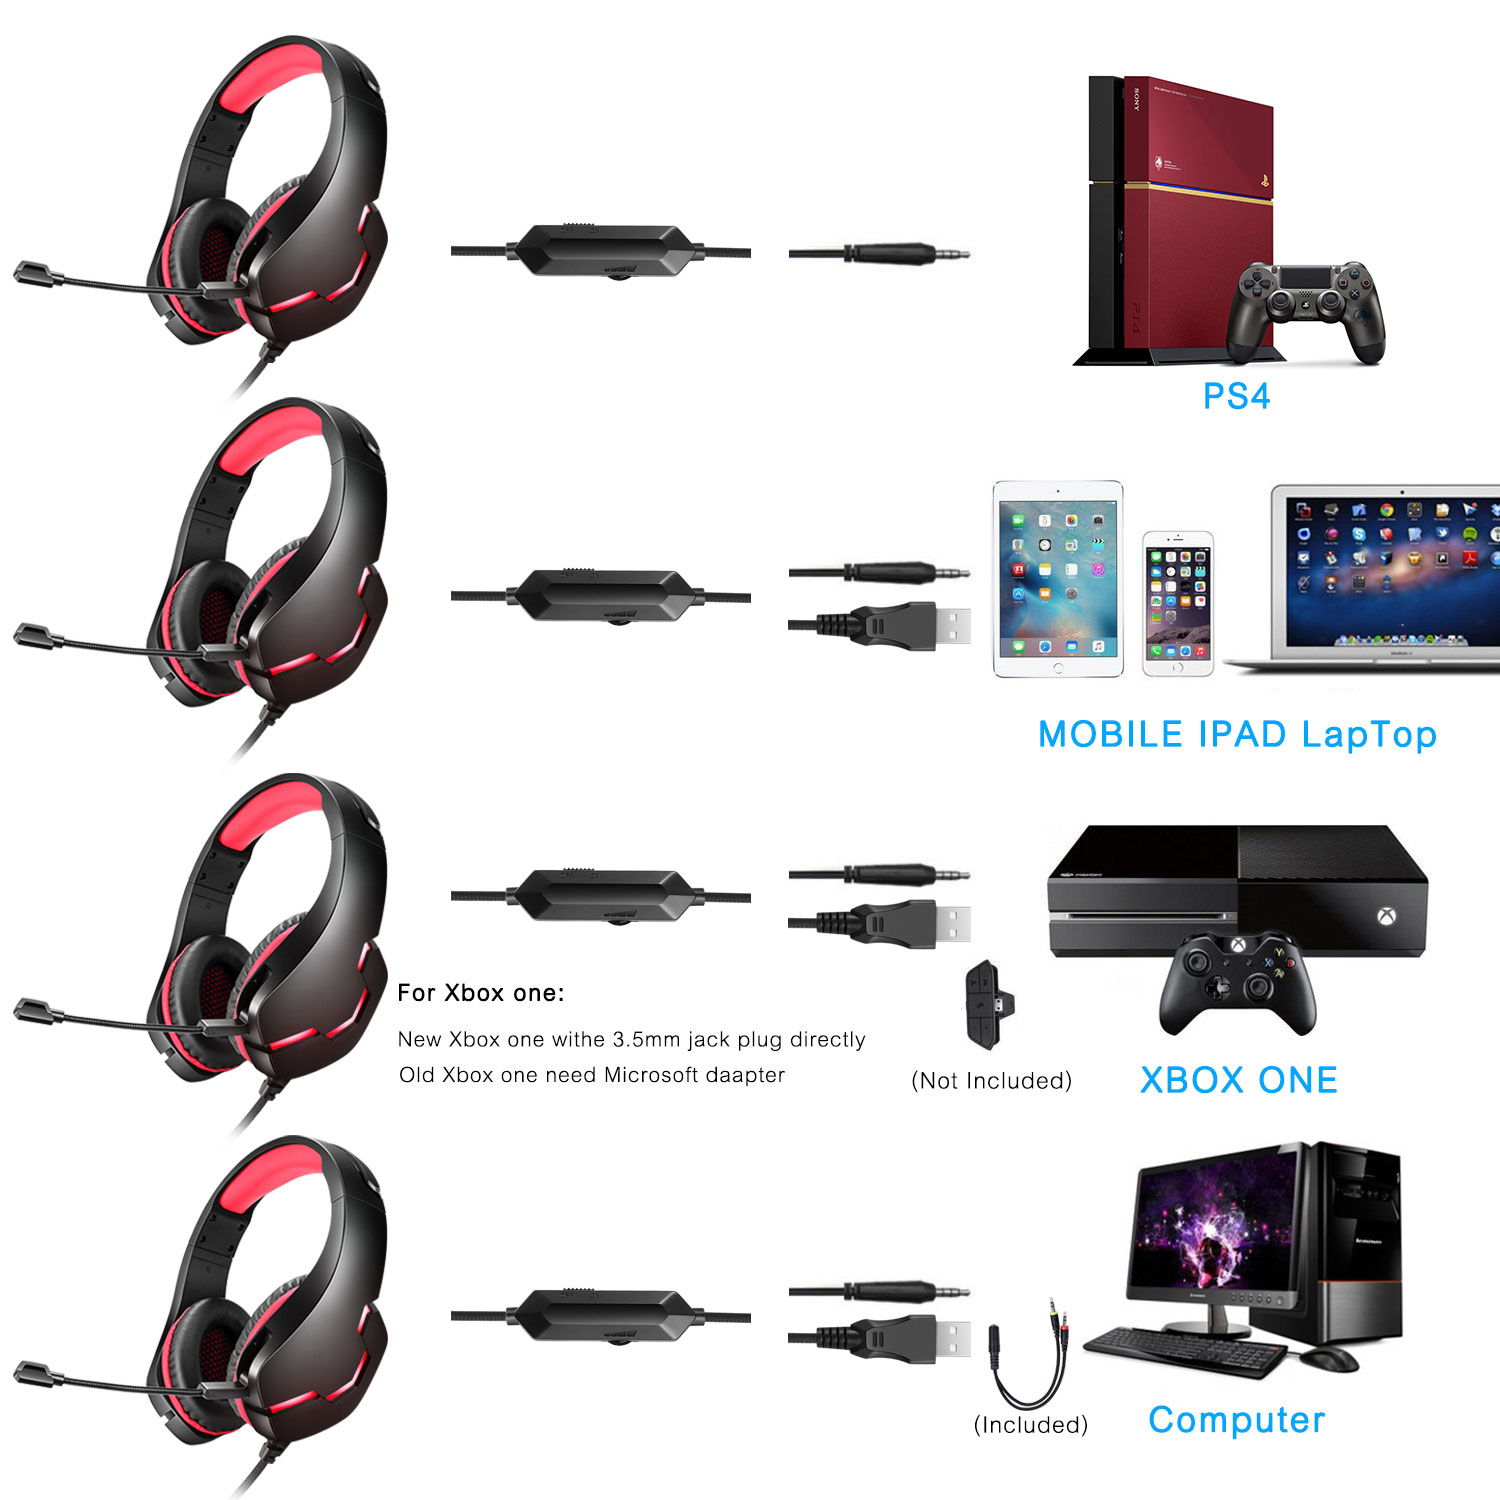 Bakeey-J10-Gaming-Headset-USB-71-35mm-Wired-Deep-Bass-Stereo-LED-Light-Headphone-with-Mic-for-PS4-Xb-1764518-1